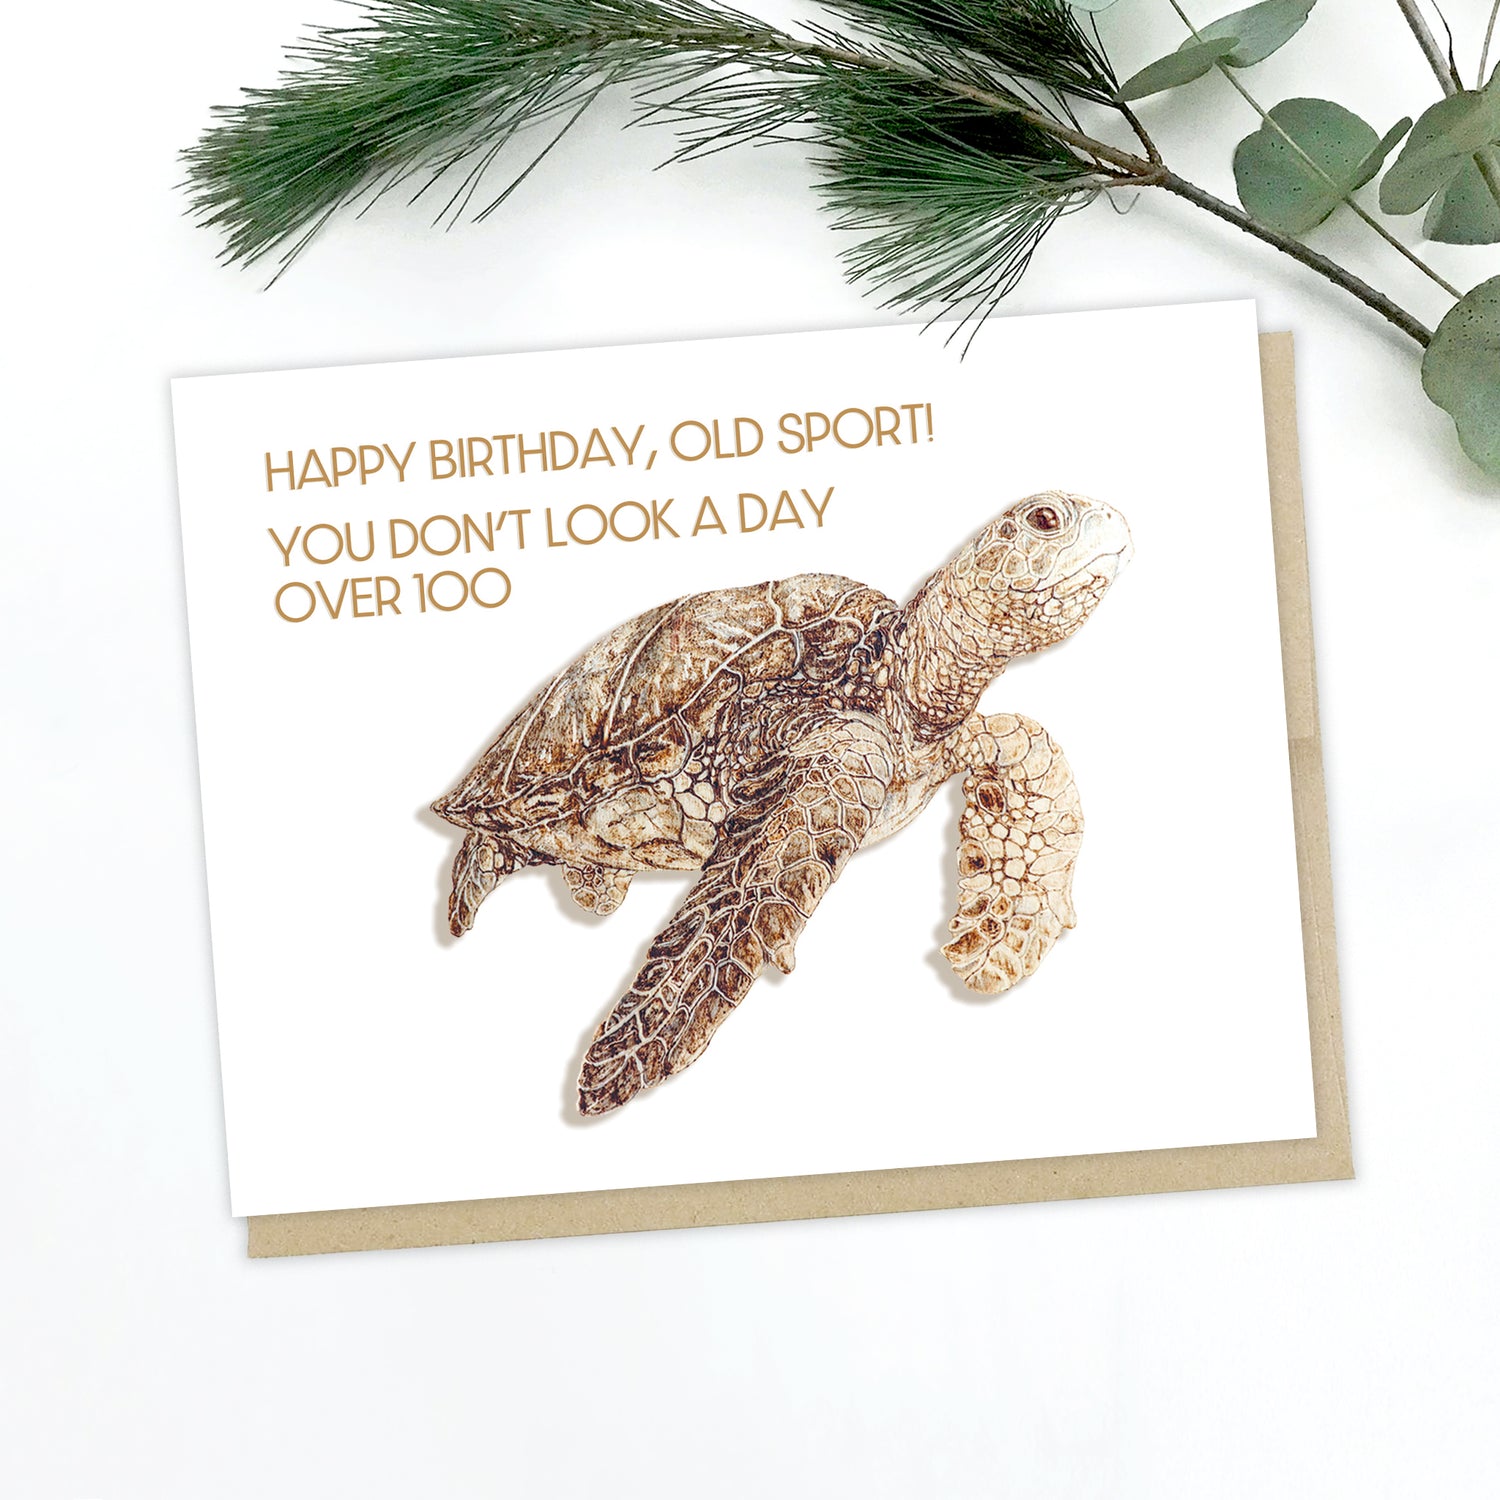 a picture of a birthday card with a turtle hand drawn and text that say: Happy Birthday Old Sport! You don't look a day over 100!